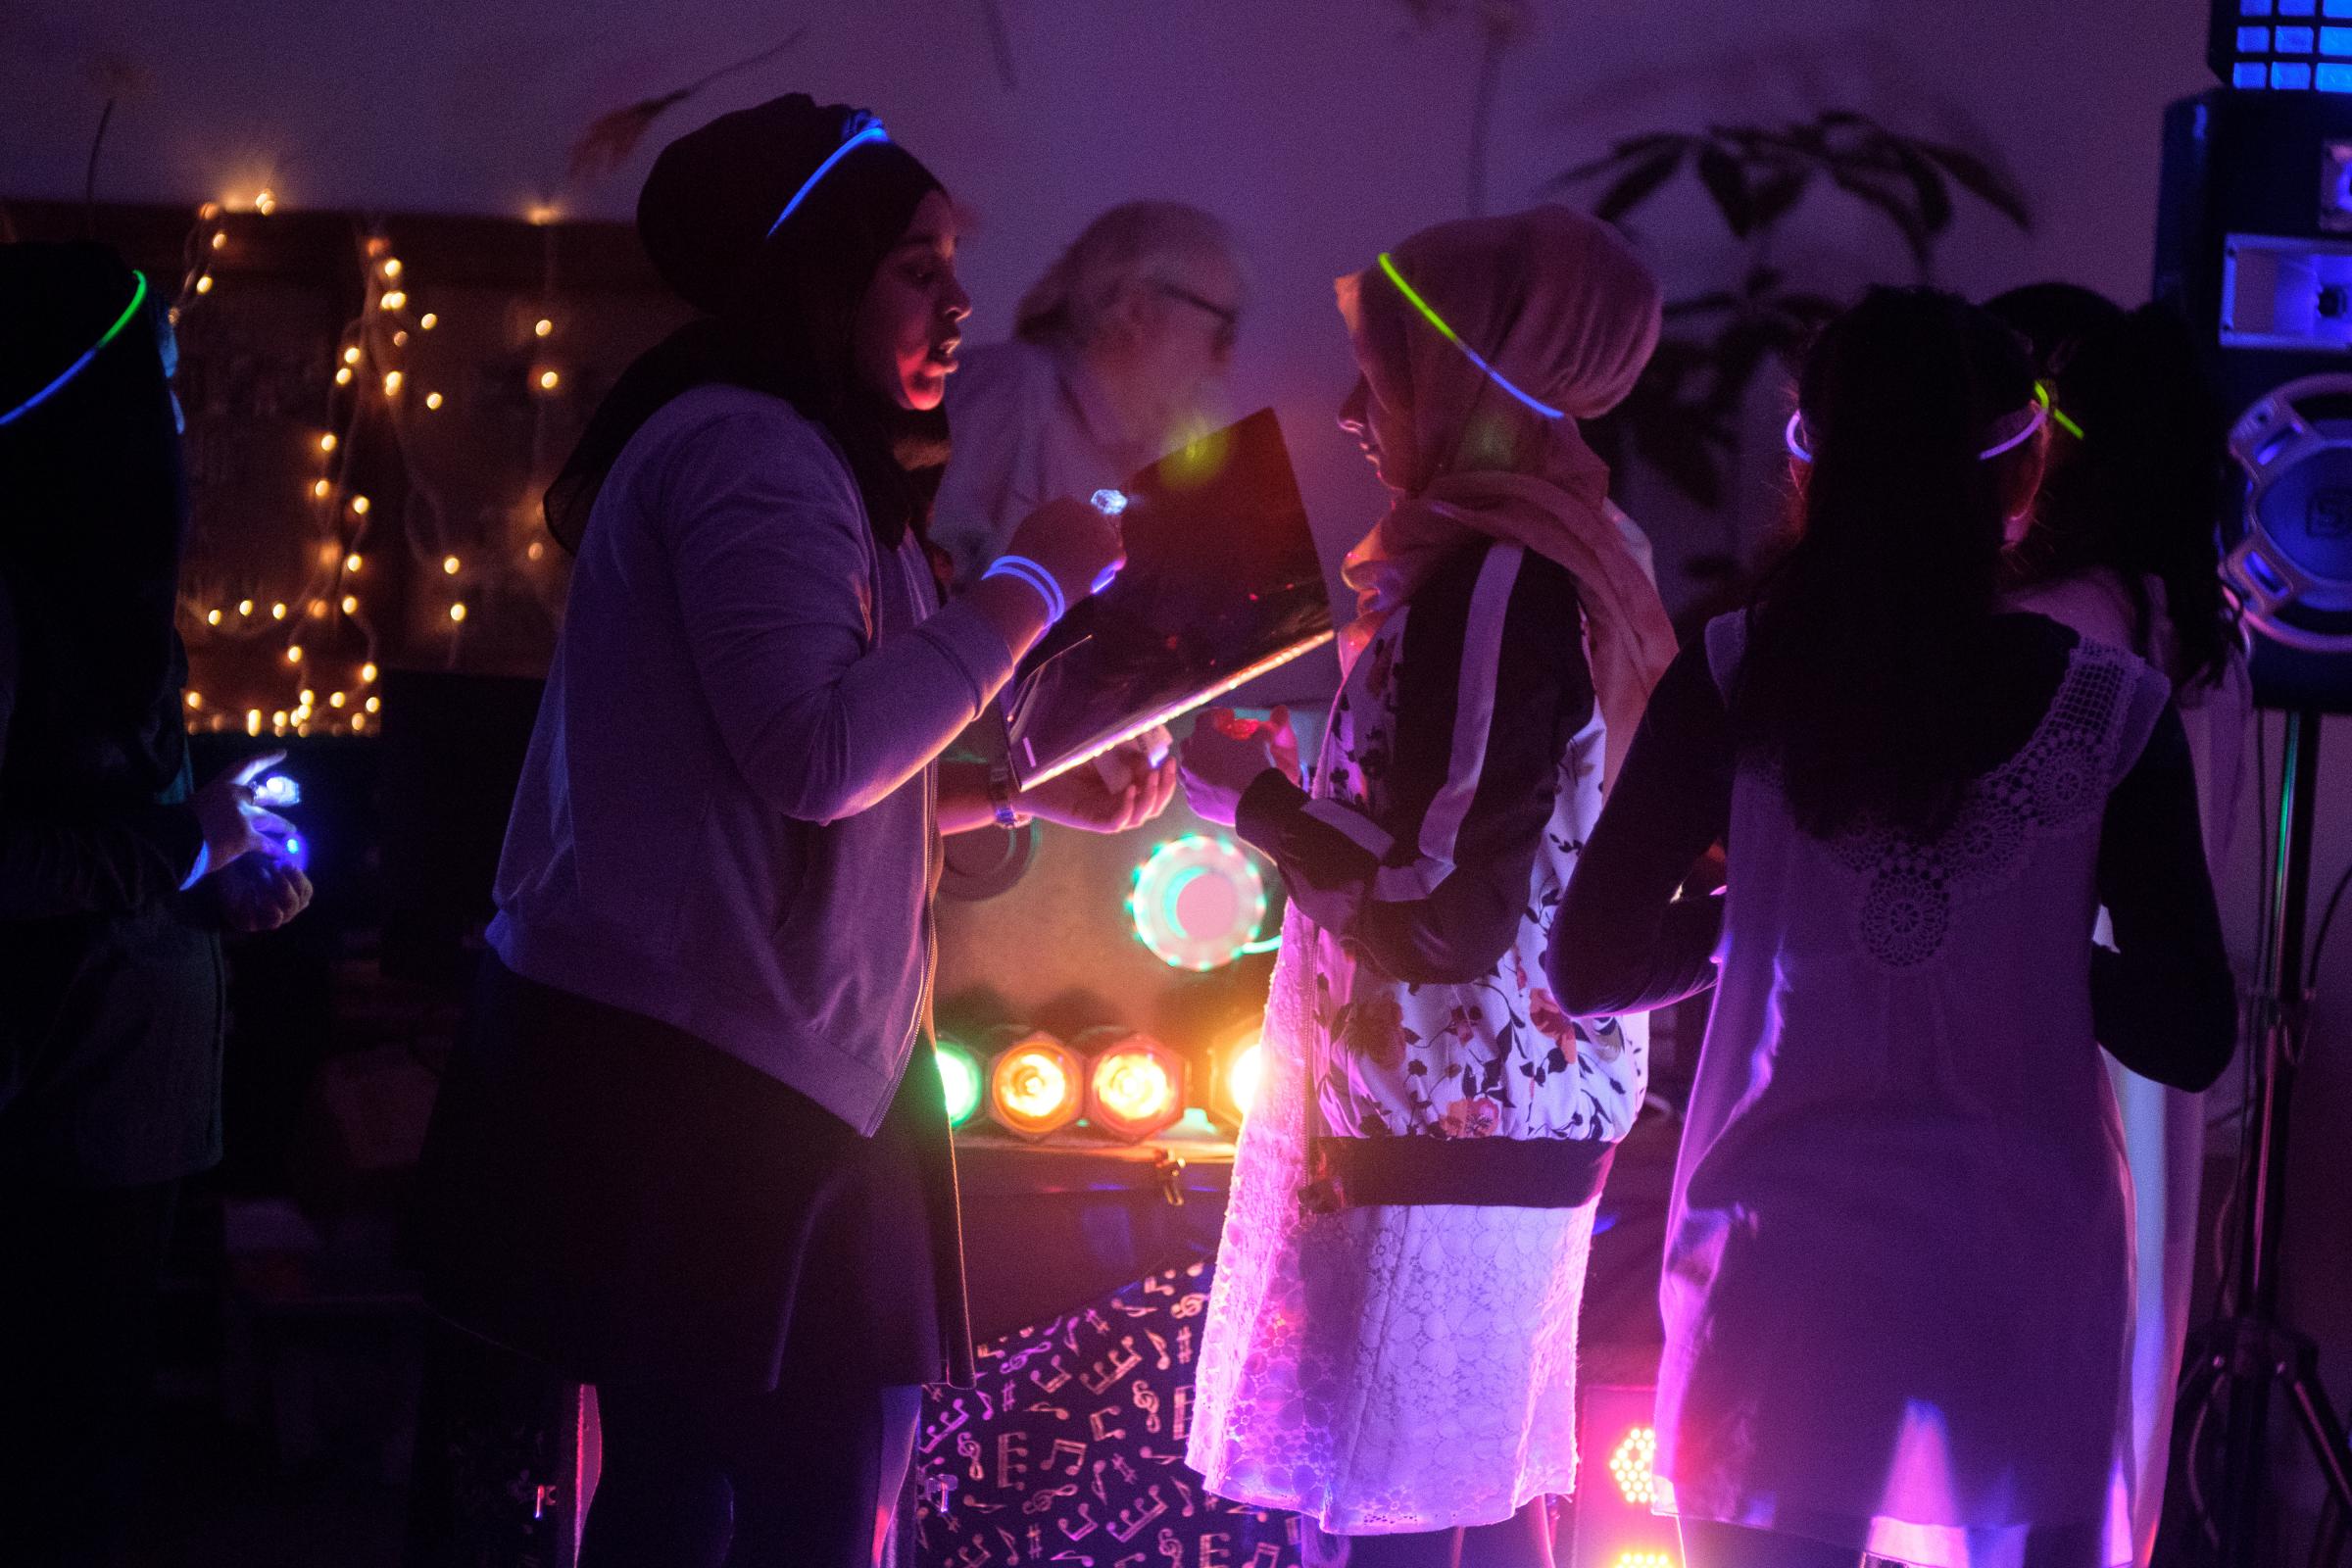 'Glow in the dark' party welcomes young people to new social space